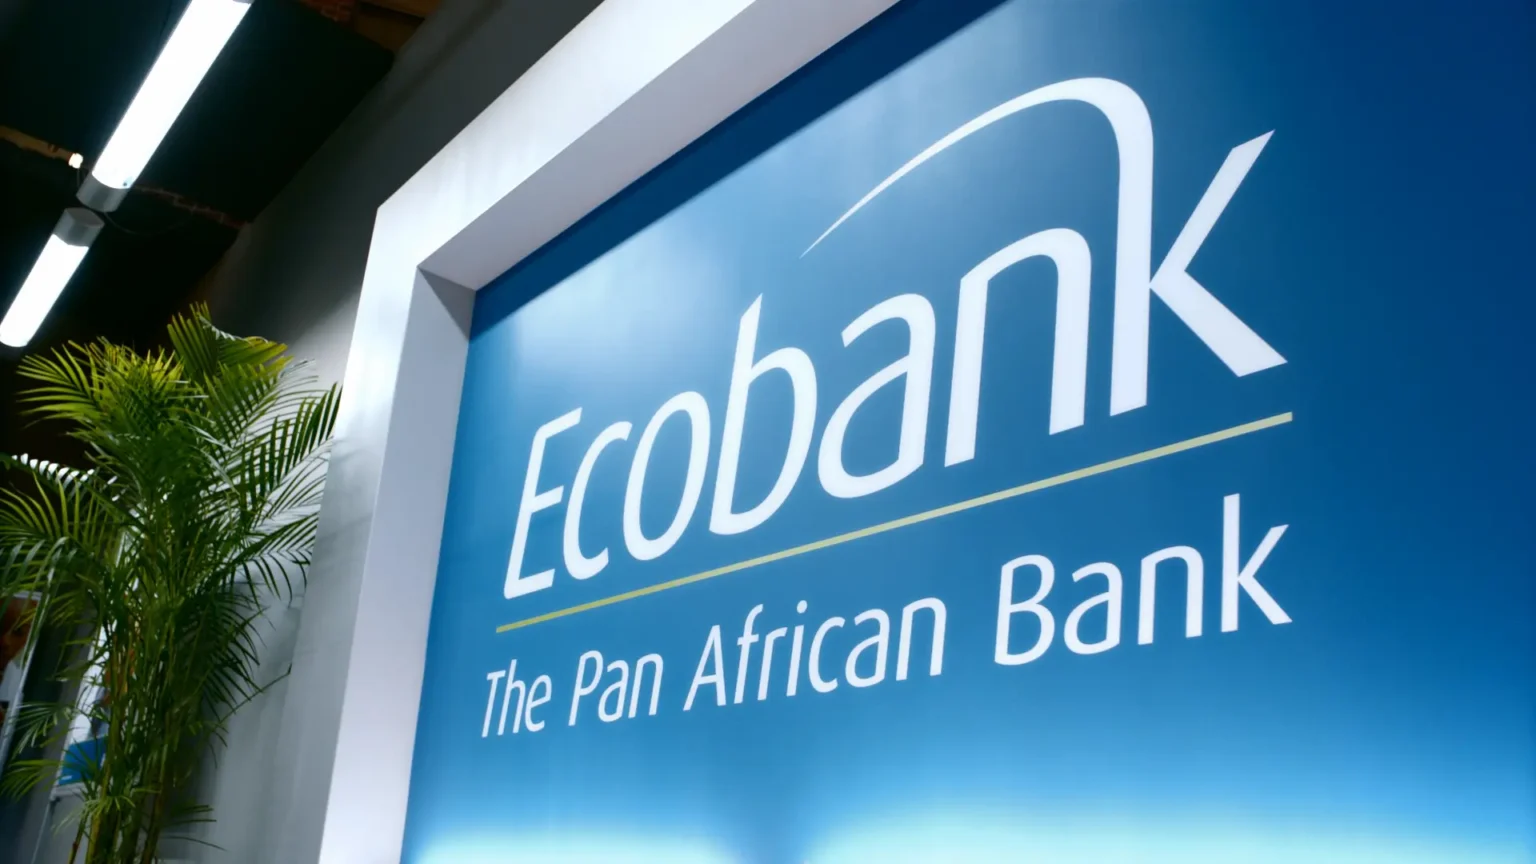 Apply for the Ecobank Associate Programme 2024